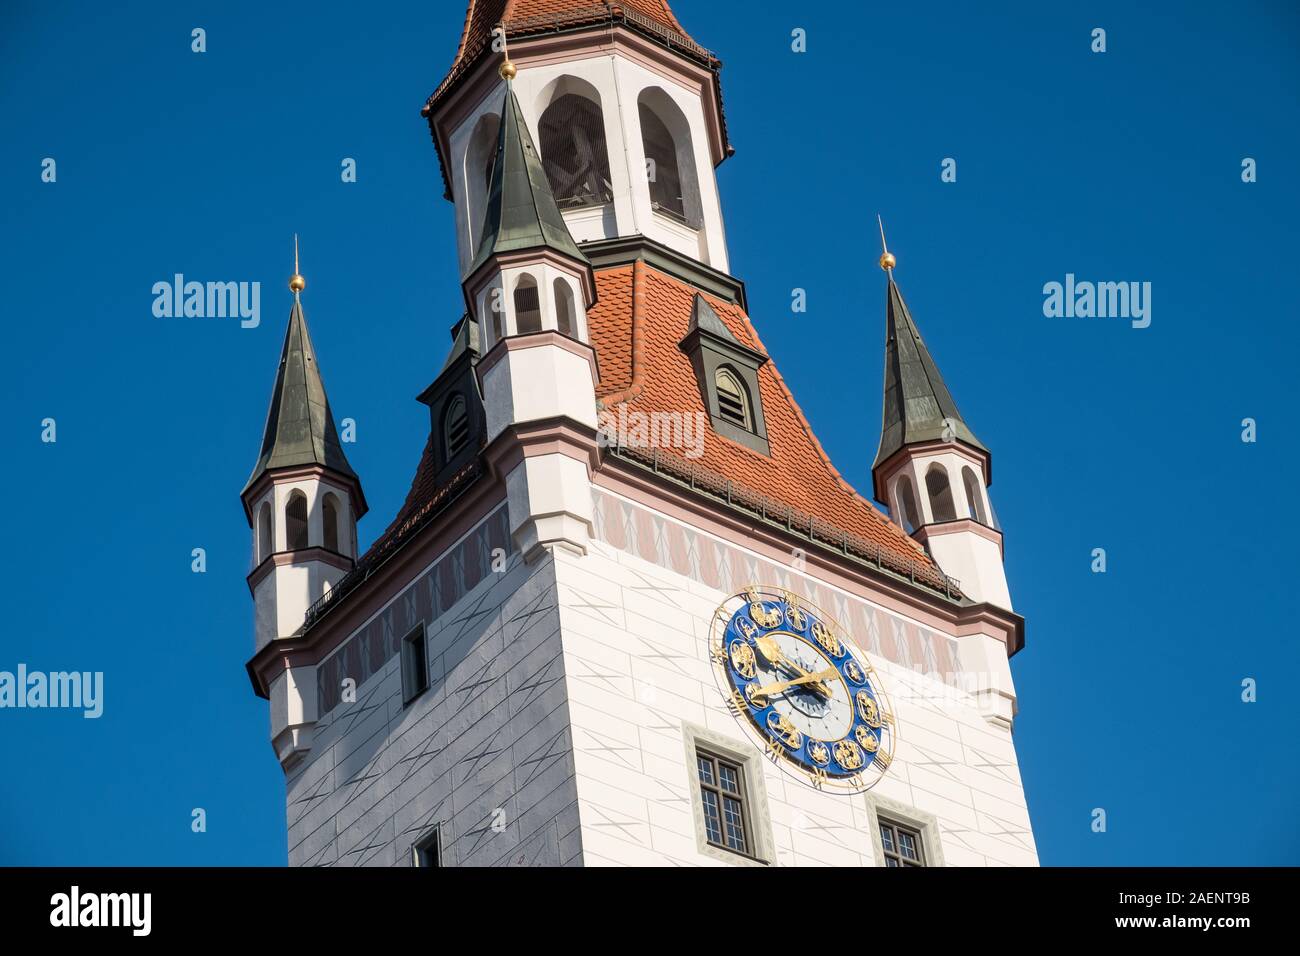 Architectural details of the Old Town Hall clock tower, Old Town, Munich, Bavaria, Germany Stock Photo